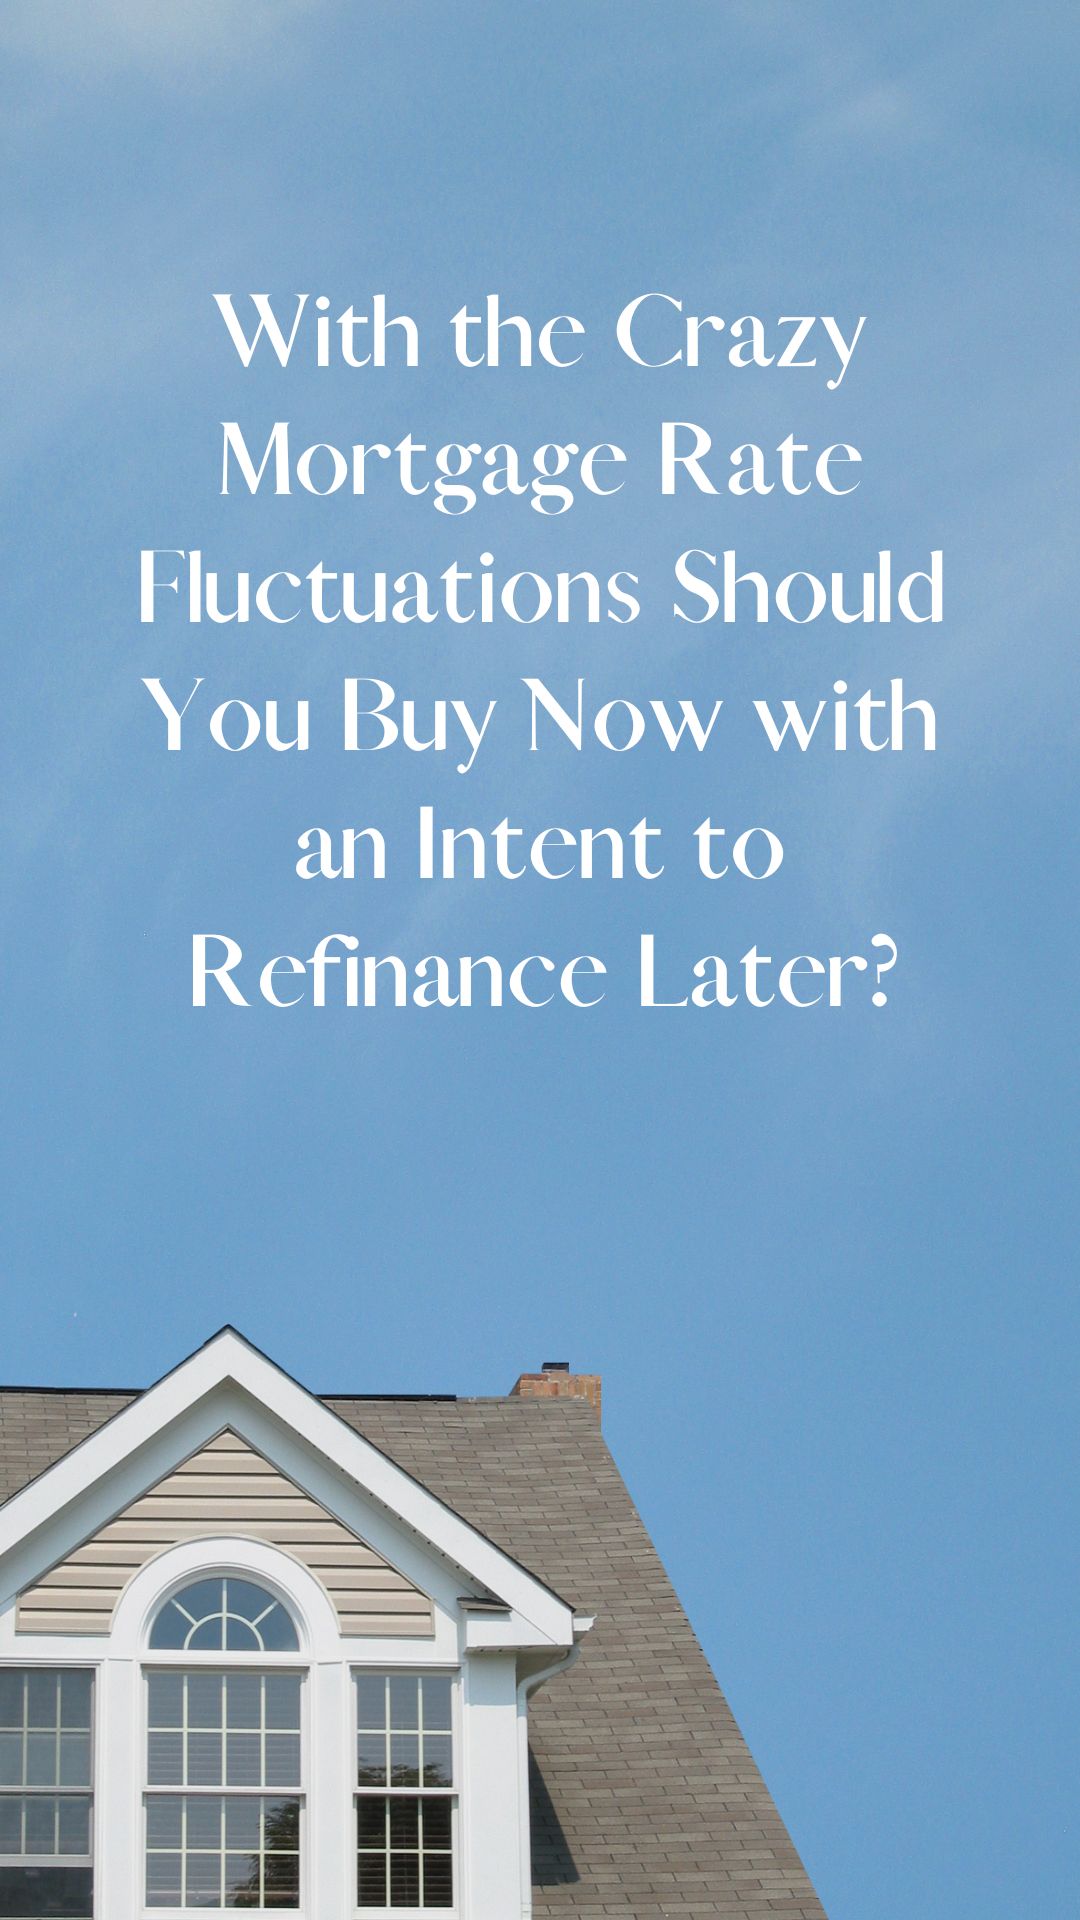 With the Crazy Mortgage Rate Flucuations Should You Buy Now with an Intent to Refinance Later?